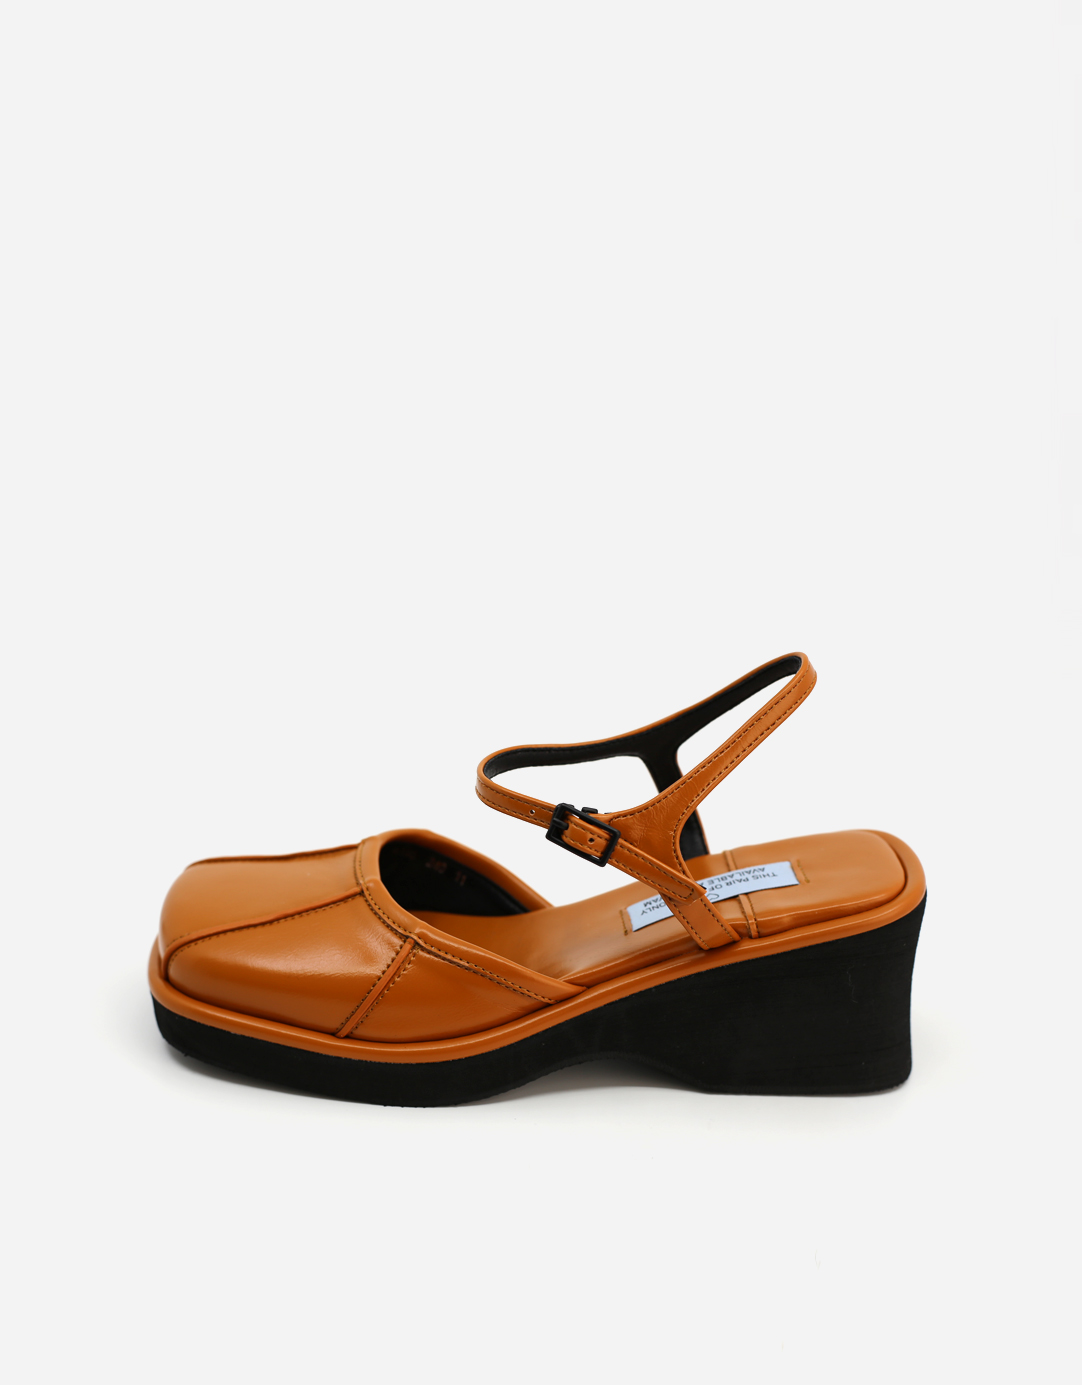 BROWN FAUCIGNY SANDALS